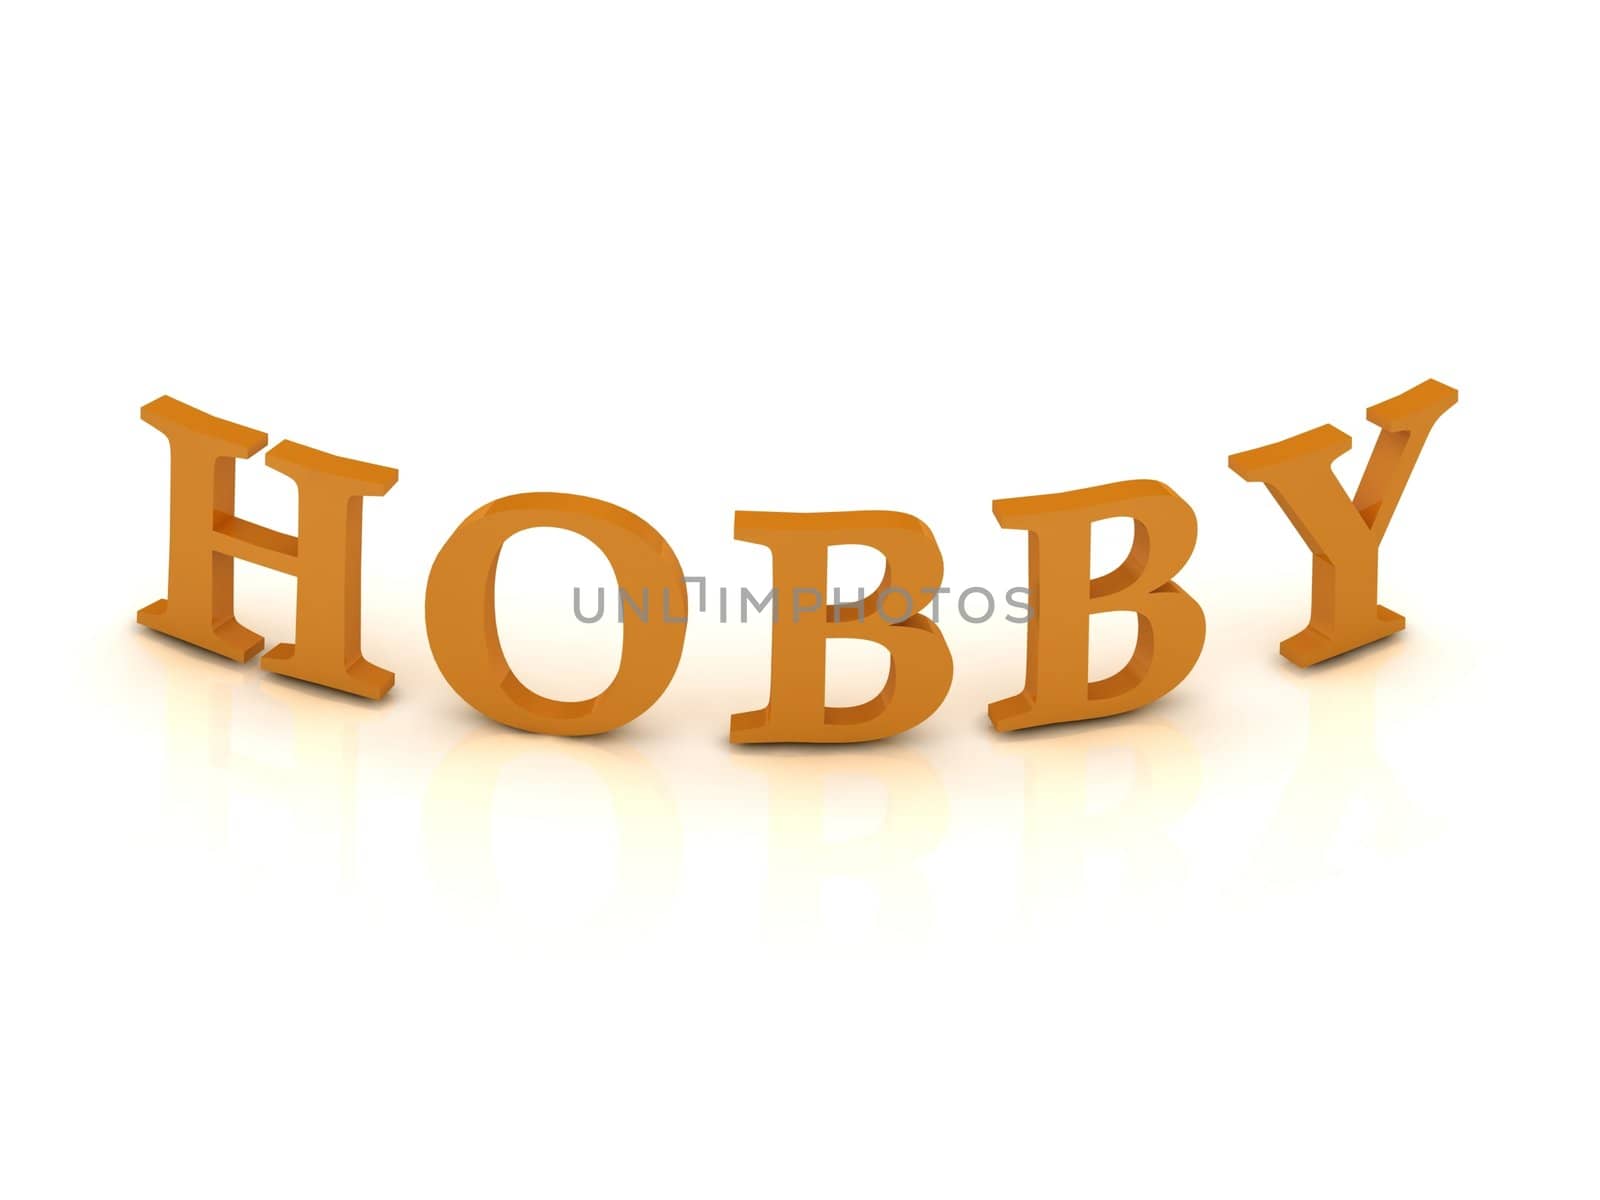 HOBBY sign with orange letters on isolated white background